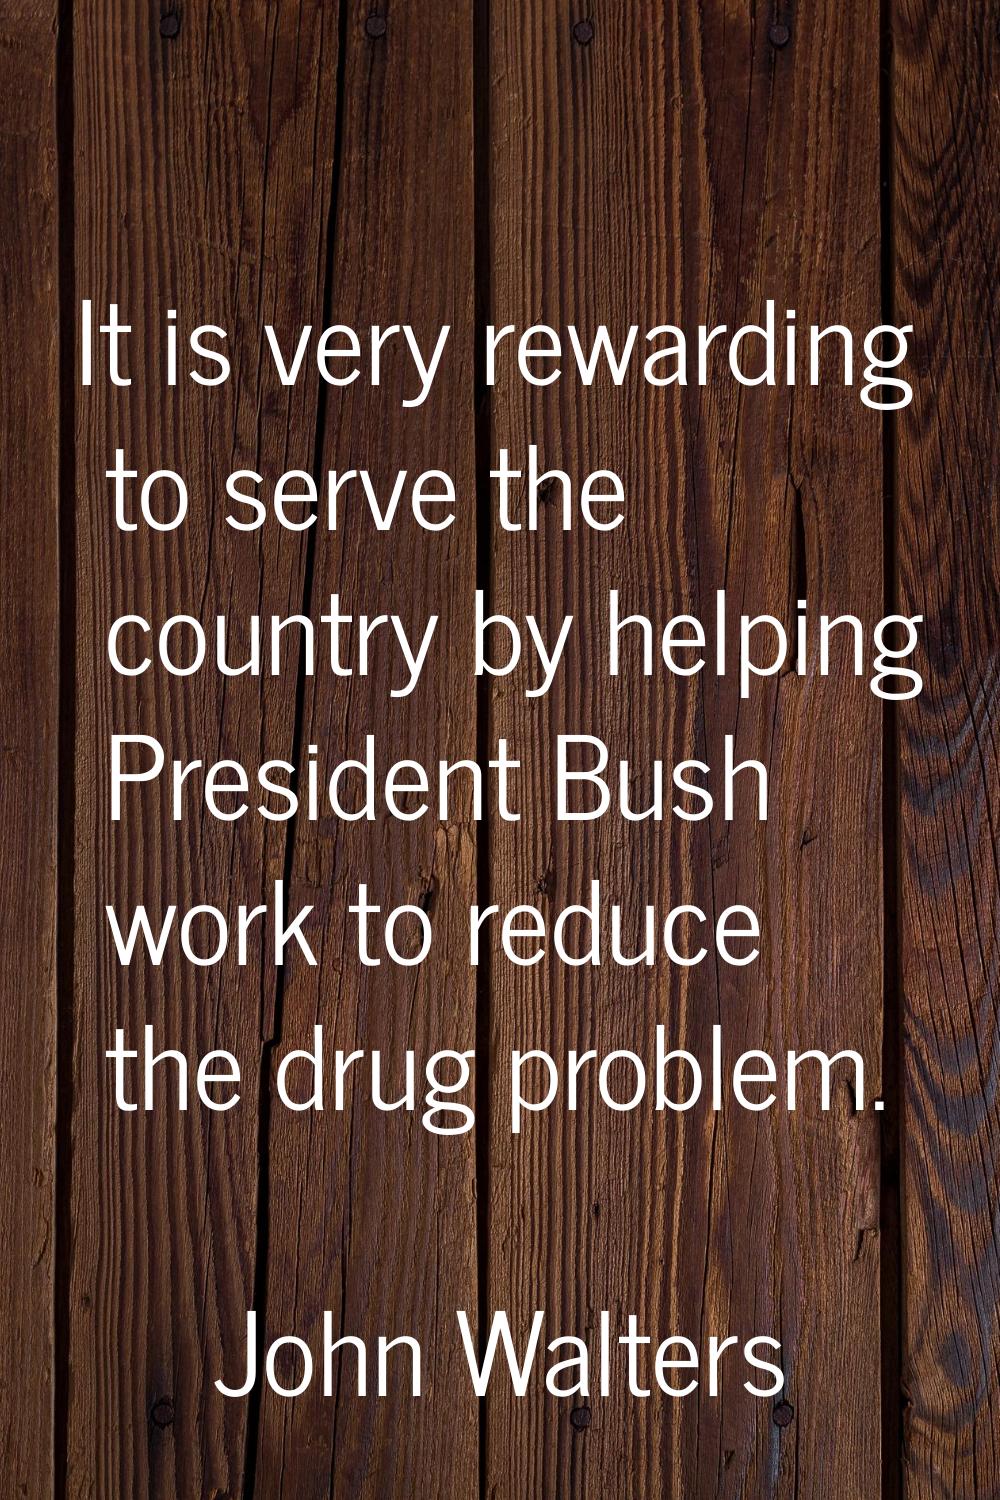 It is very rewarding to serve the country by helping President Bush work to reduce the drug problem